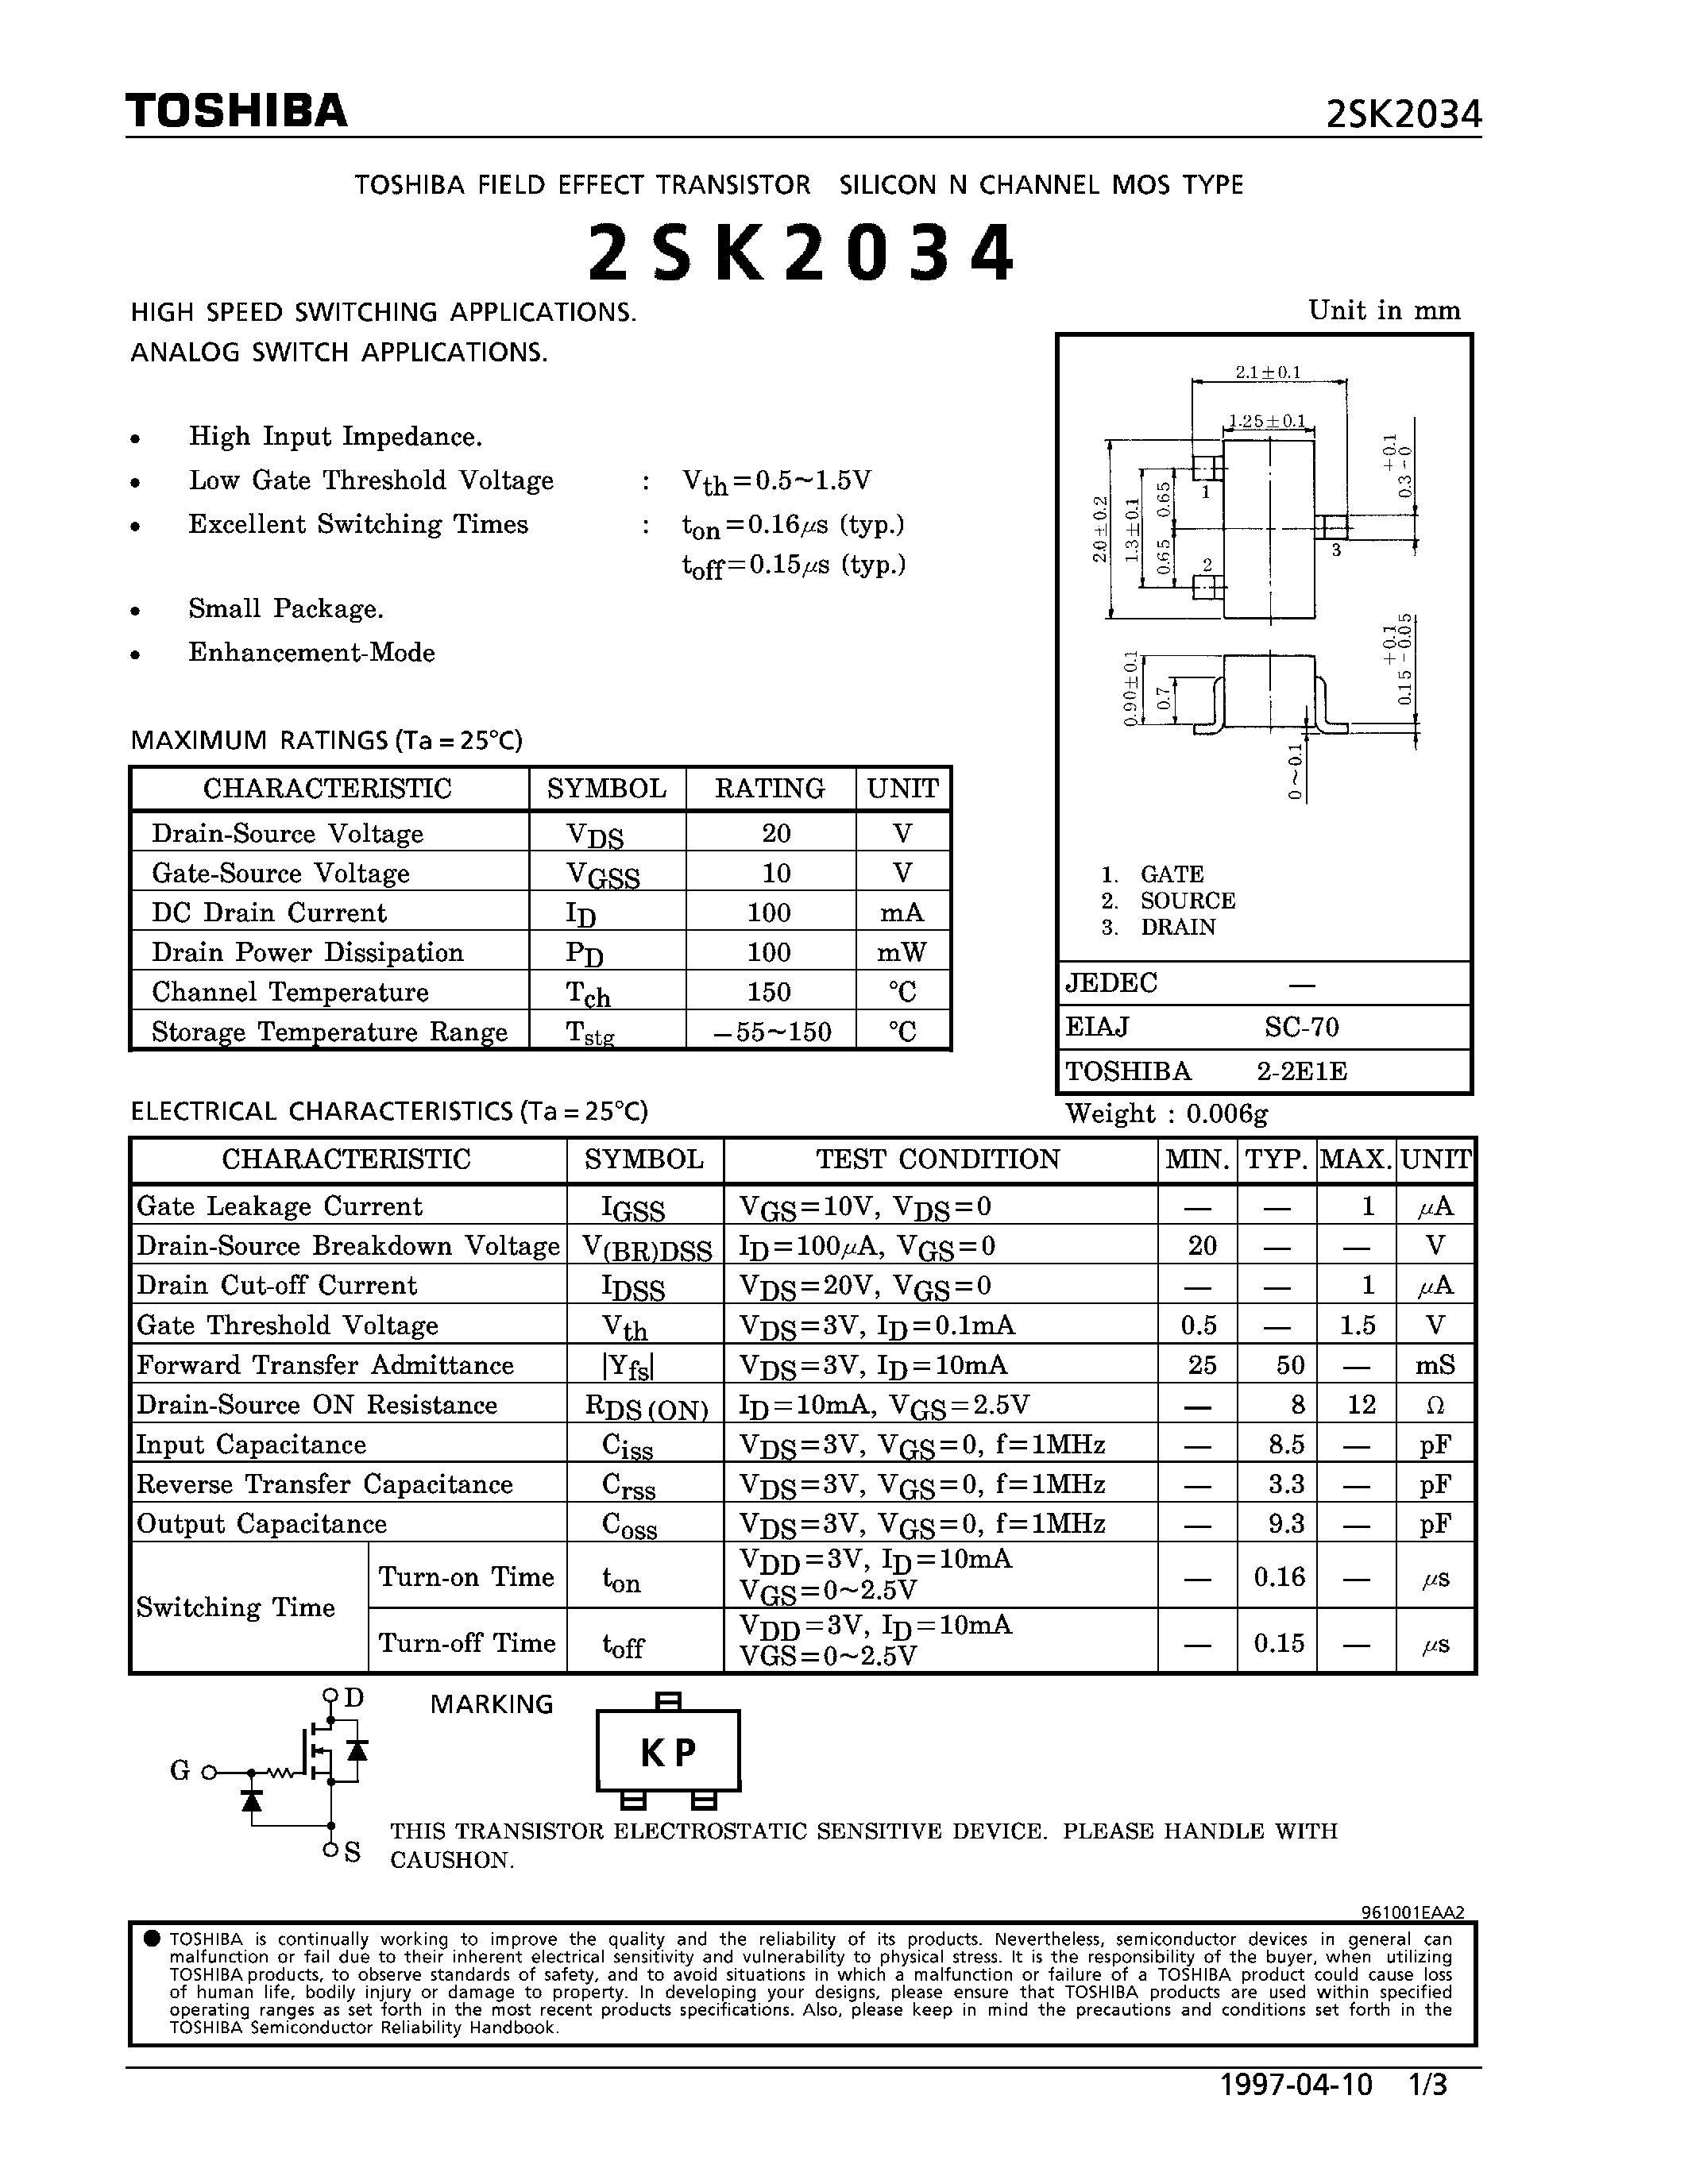 Datasheet 2SK2034 - N CHANNEL MOS TYPE (HIGH SPEED SWITCHING/ ANALOG SWITCH APPLICATIONS) page 1